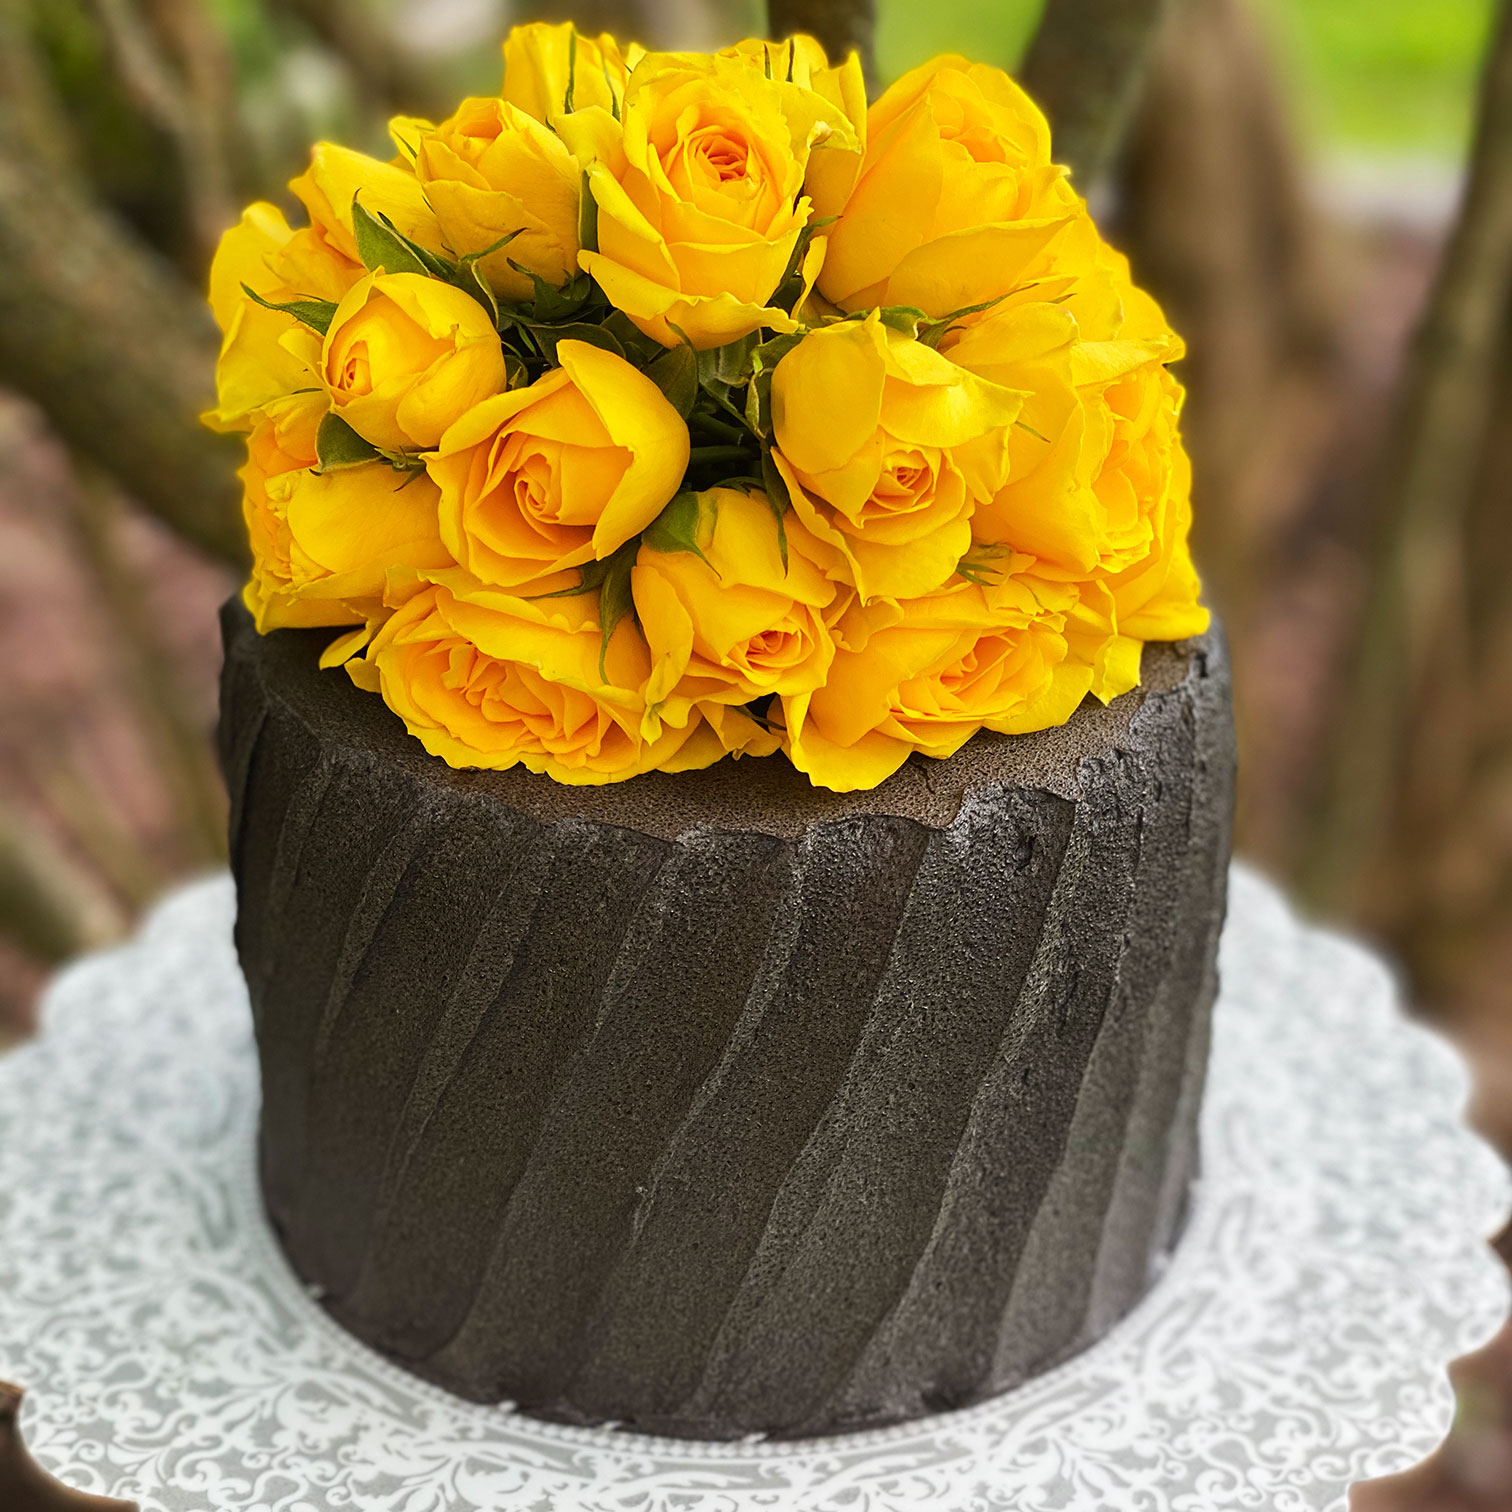 Flower Chocolate Frosting Cake